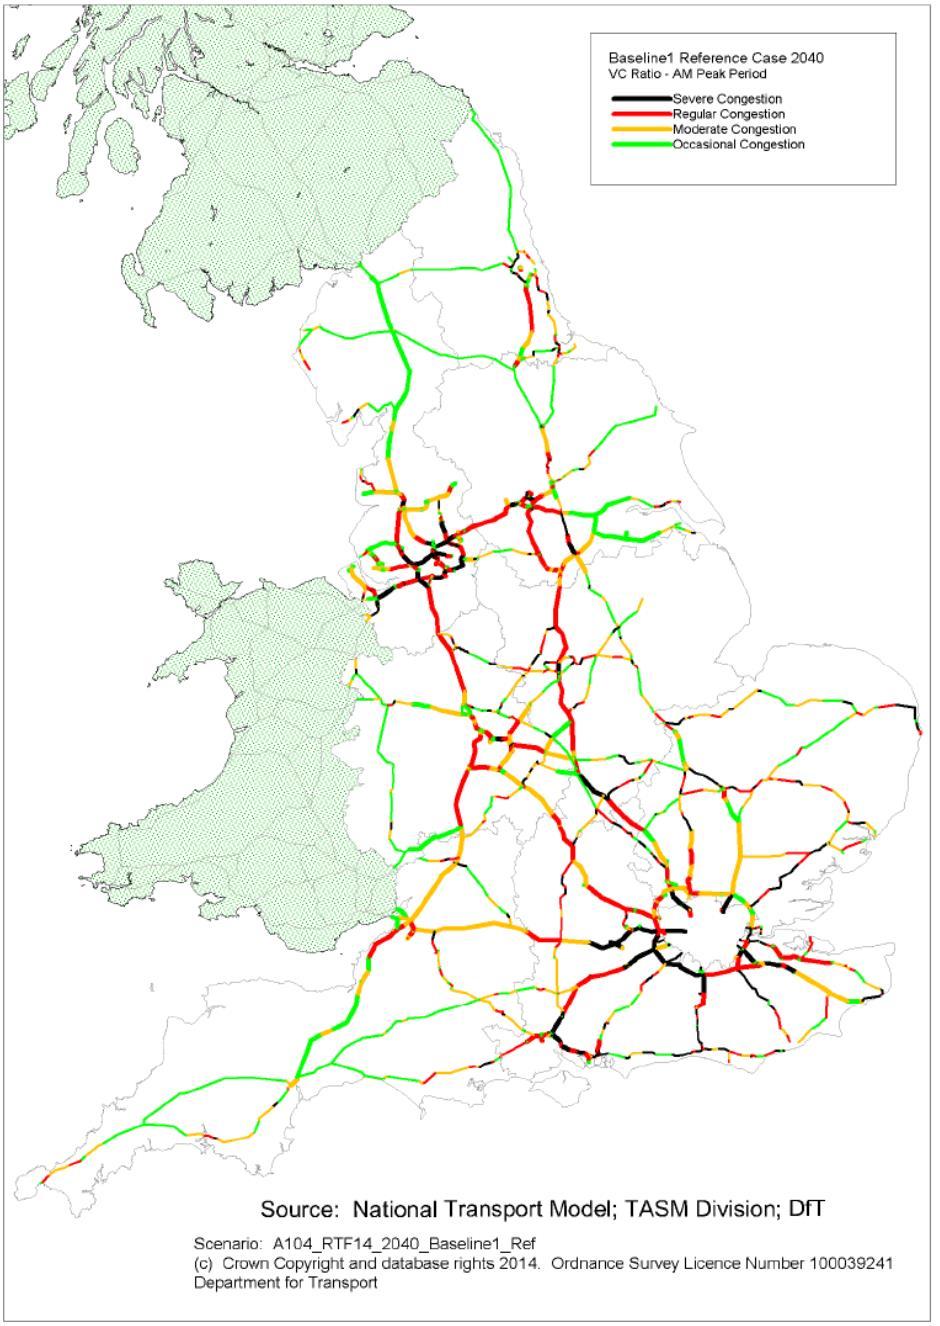 The Strategic Road Network 2040 By 2040